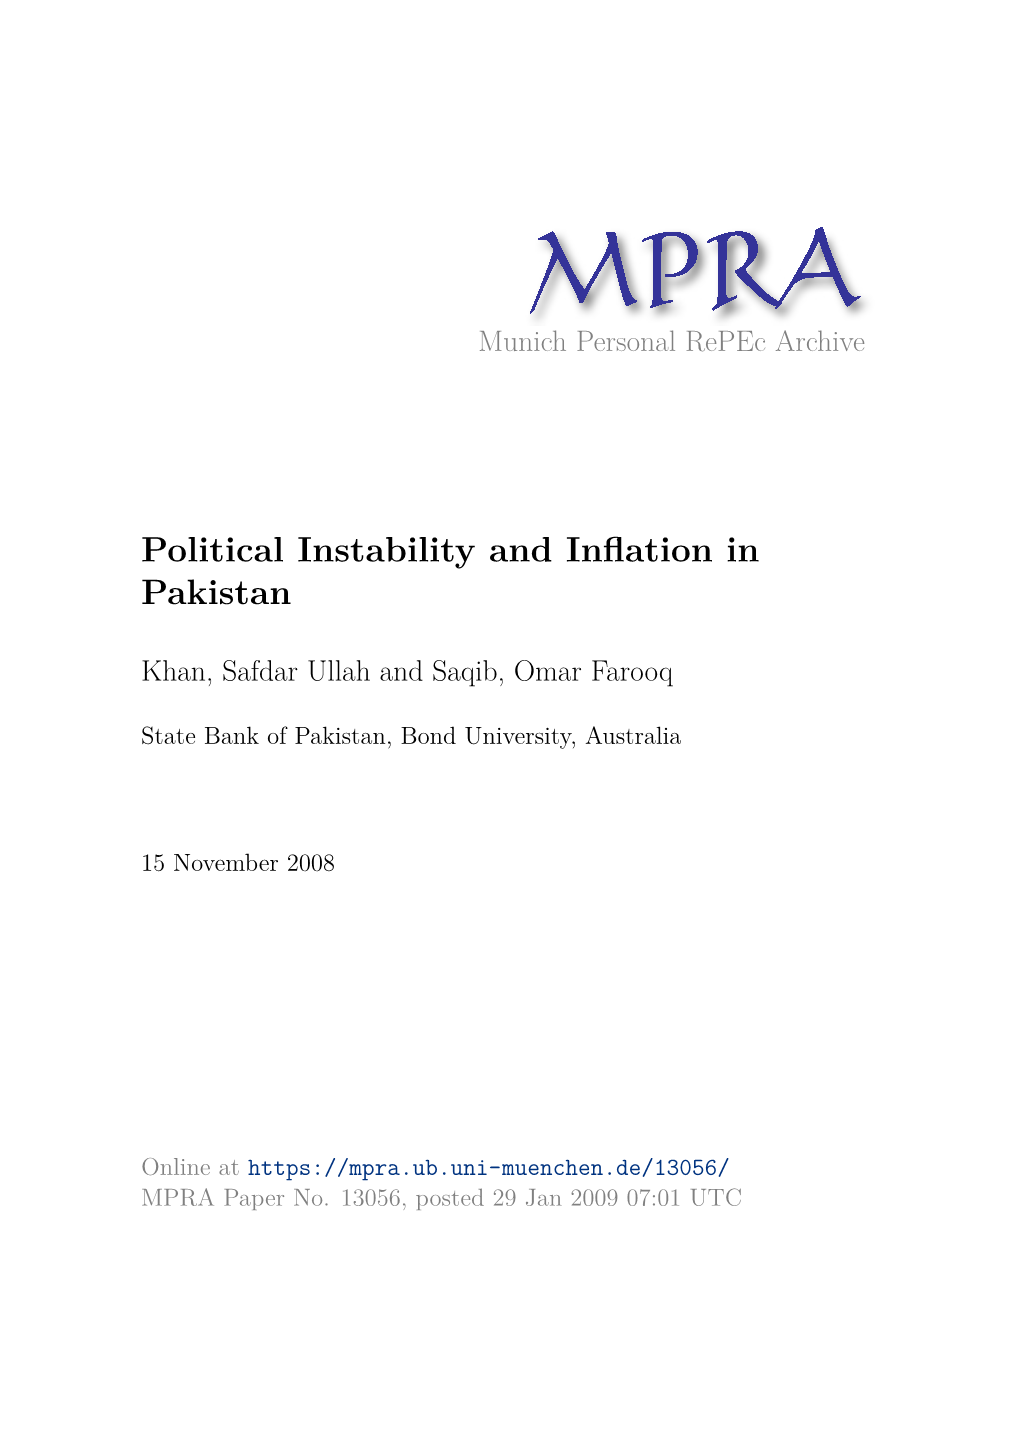 Political Instability and Inflation in Pakistan